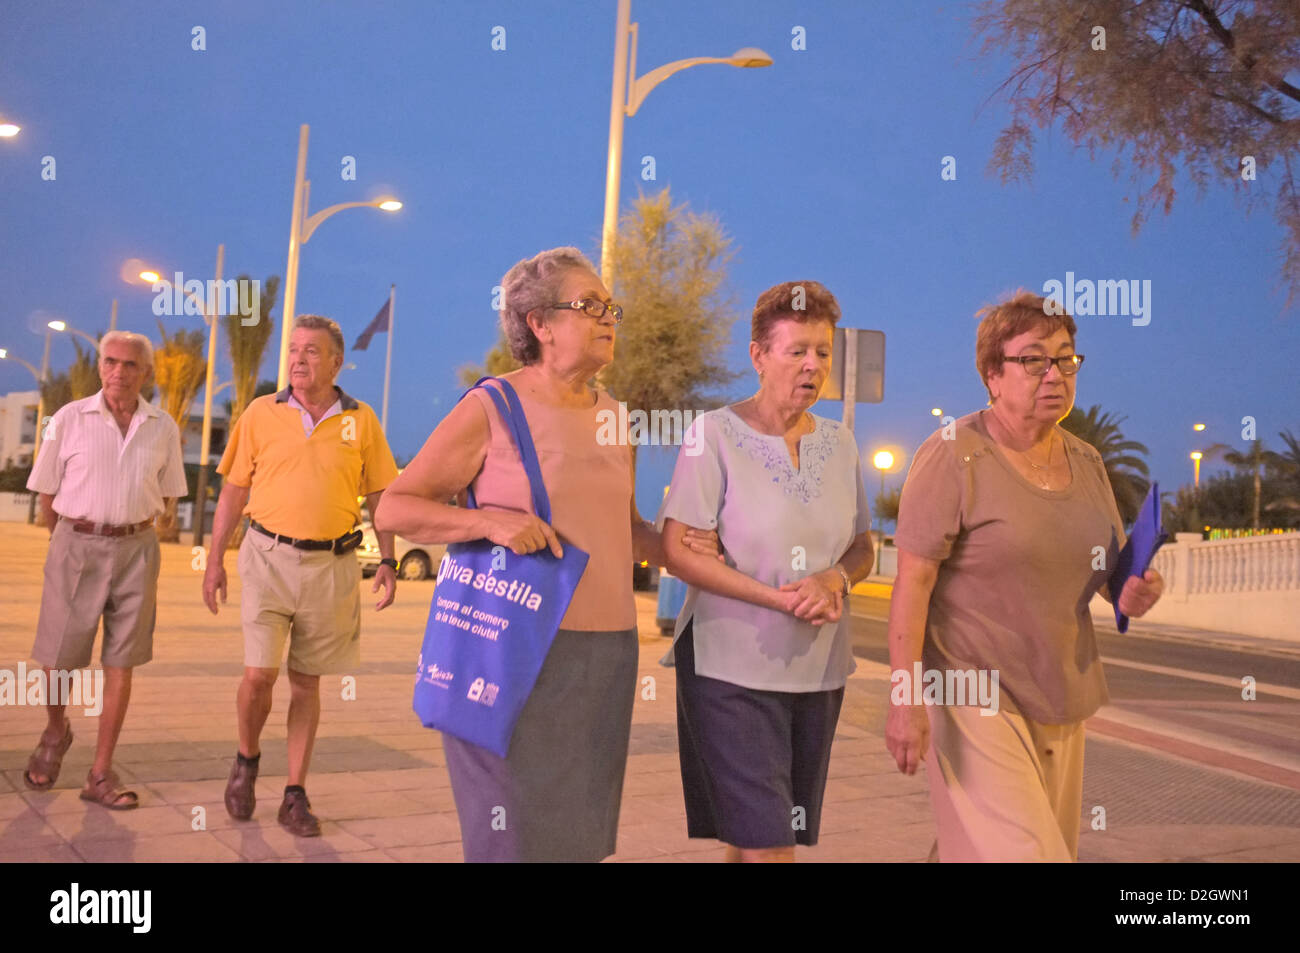 Spanish families on an evening stroll Stock Photo